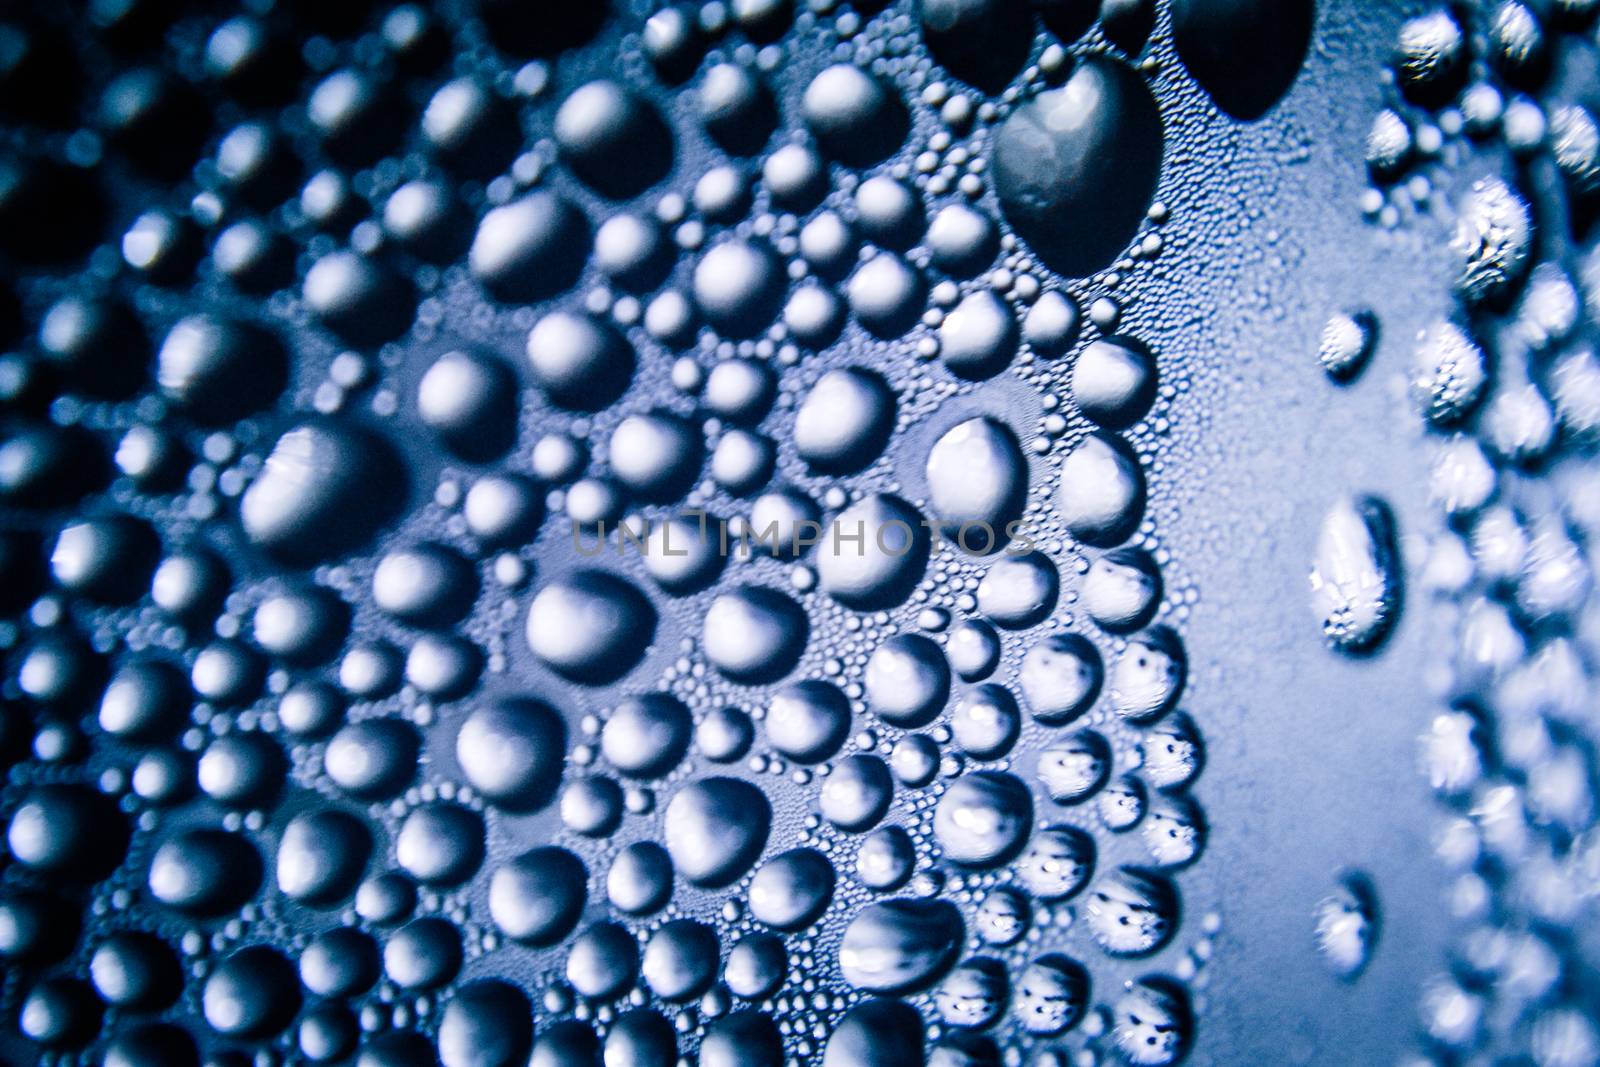 Texture of water drops on bottle by apichart